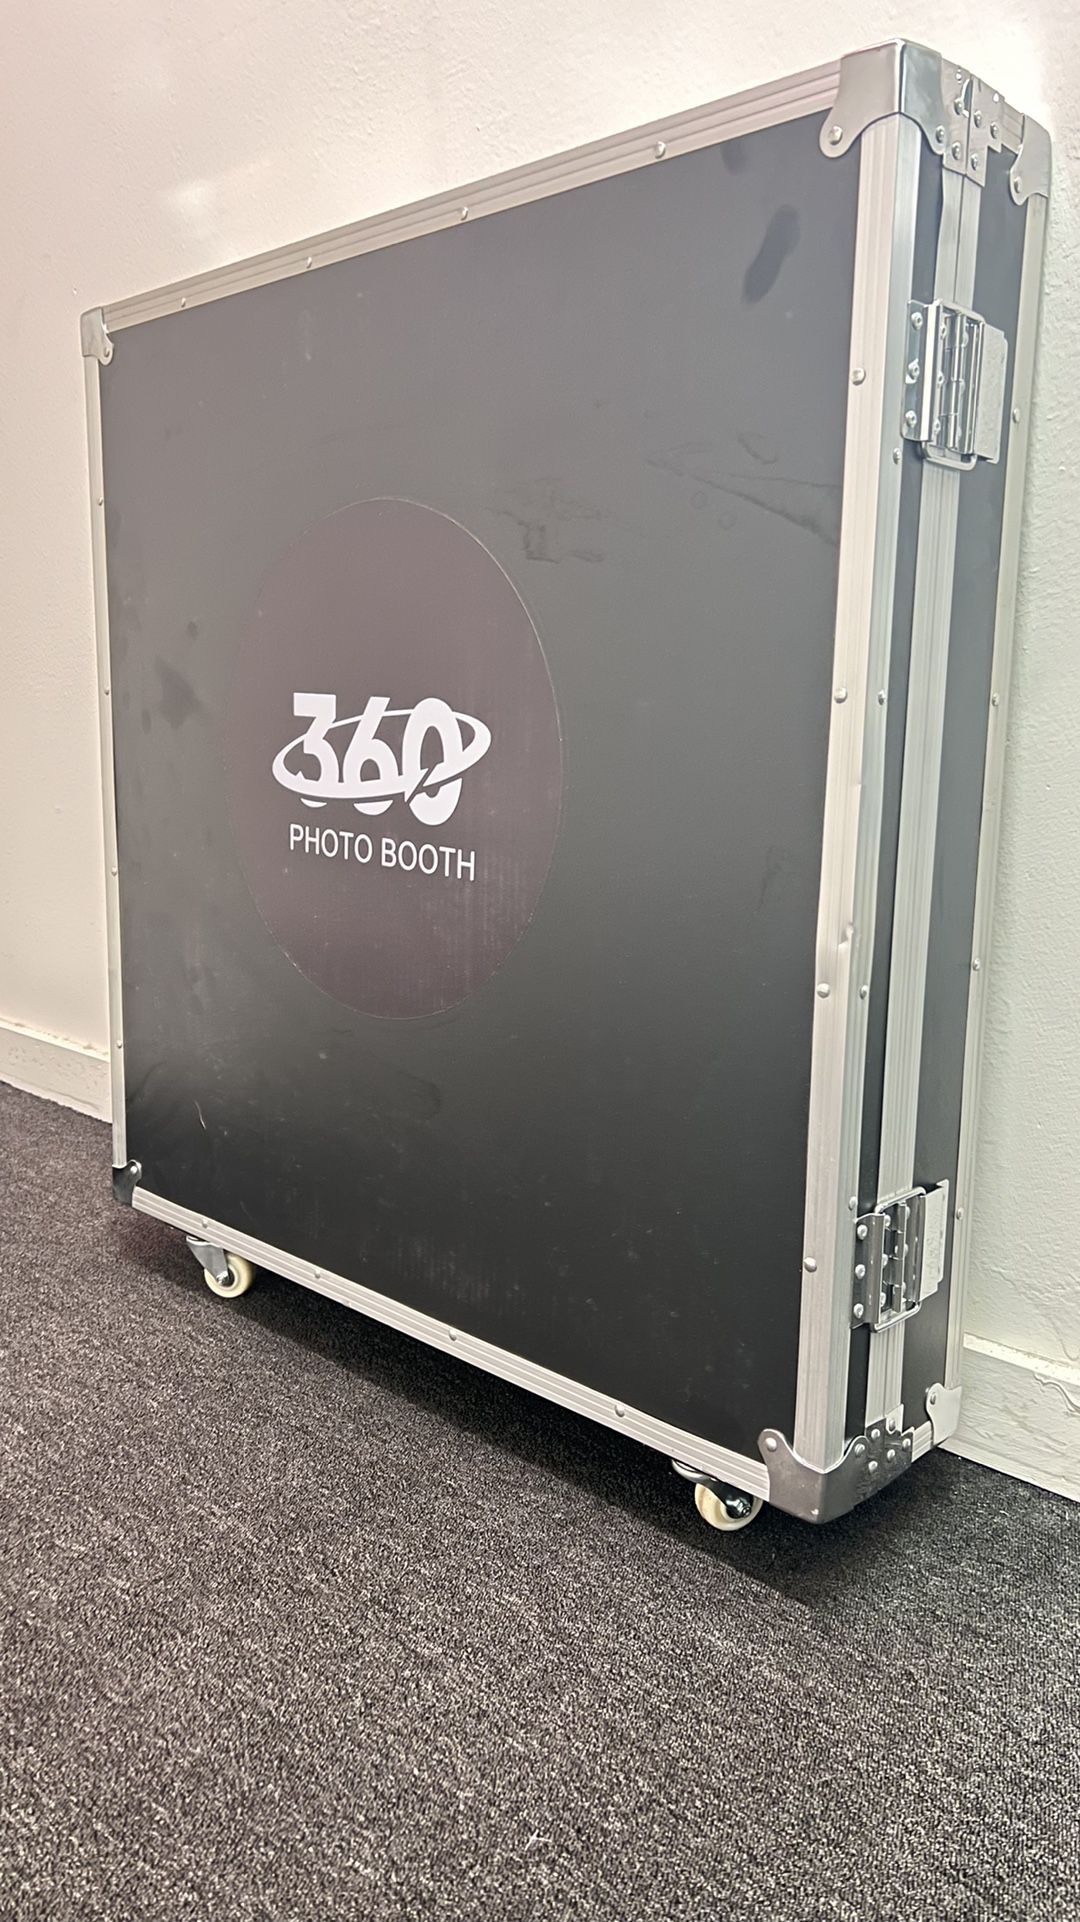 BRAND NEW 360 PHOTO BOOTH W/ CASE, RING LIGHT AND PROPS!!